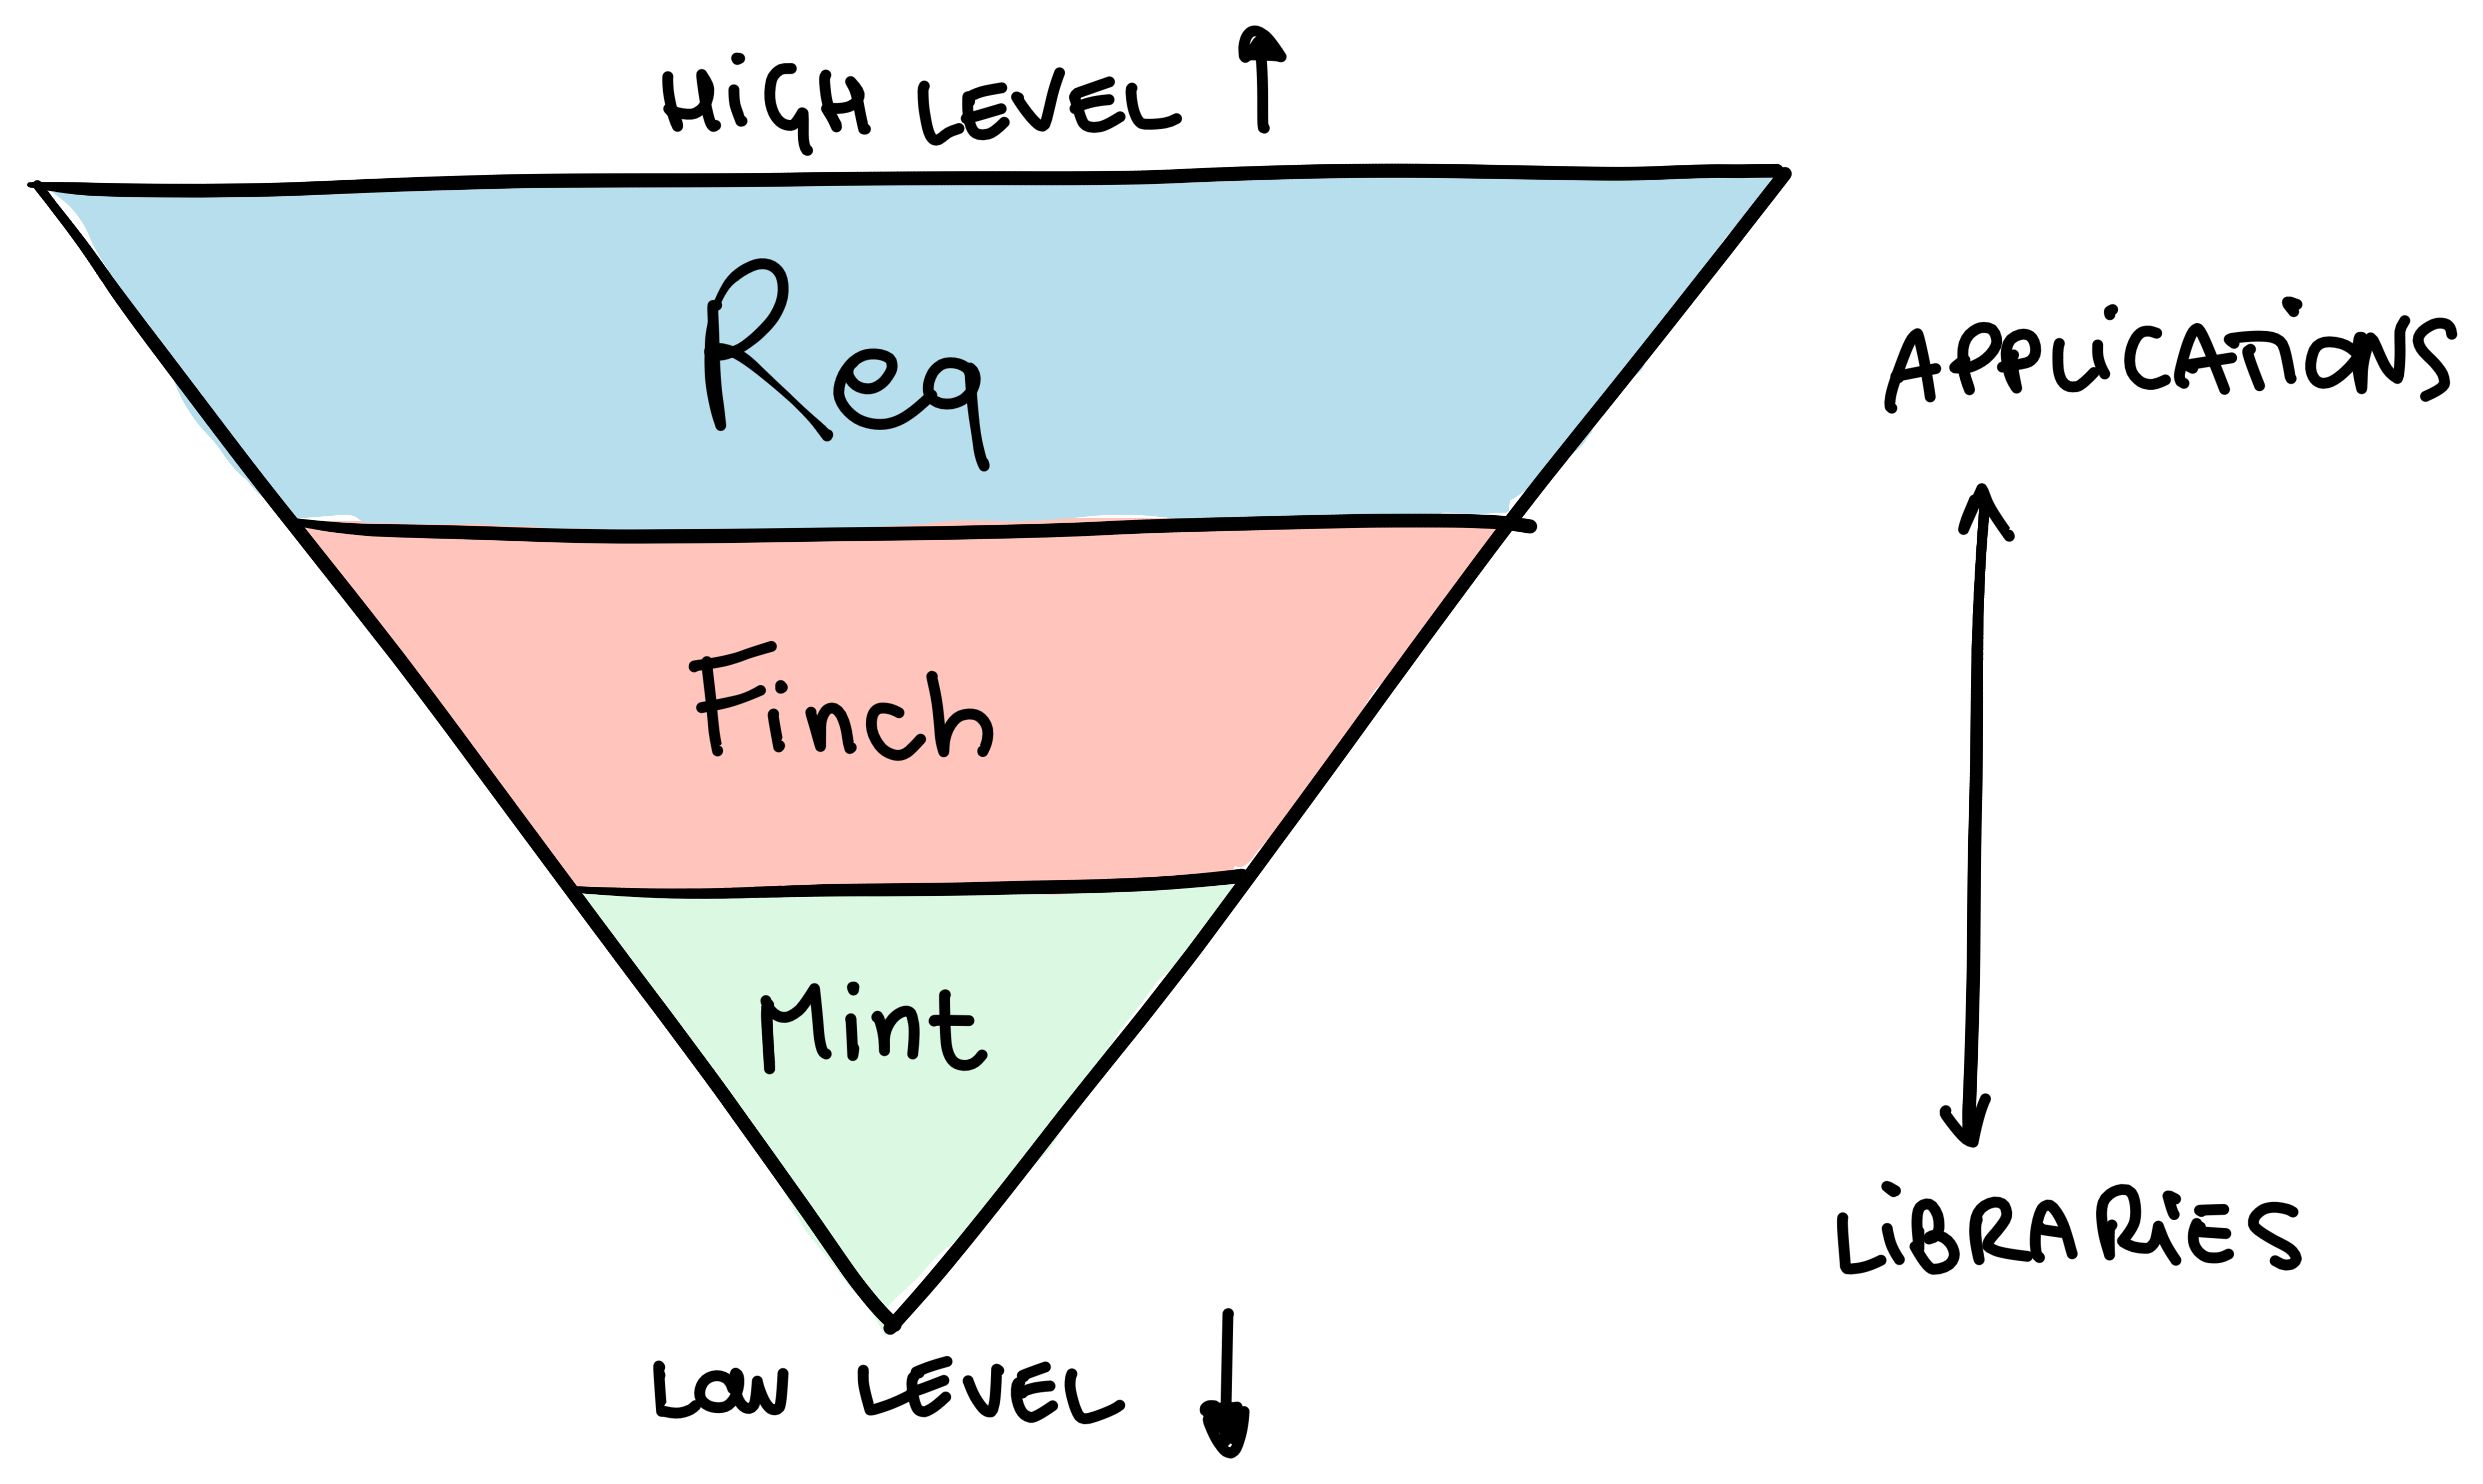 A drawing of a pyramid (like the food pyramid thing) but for HTTP clients